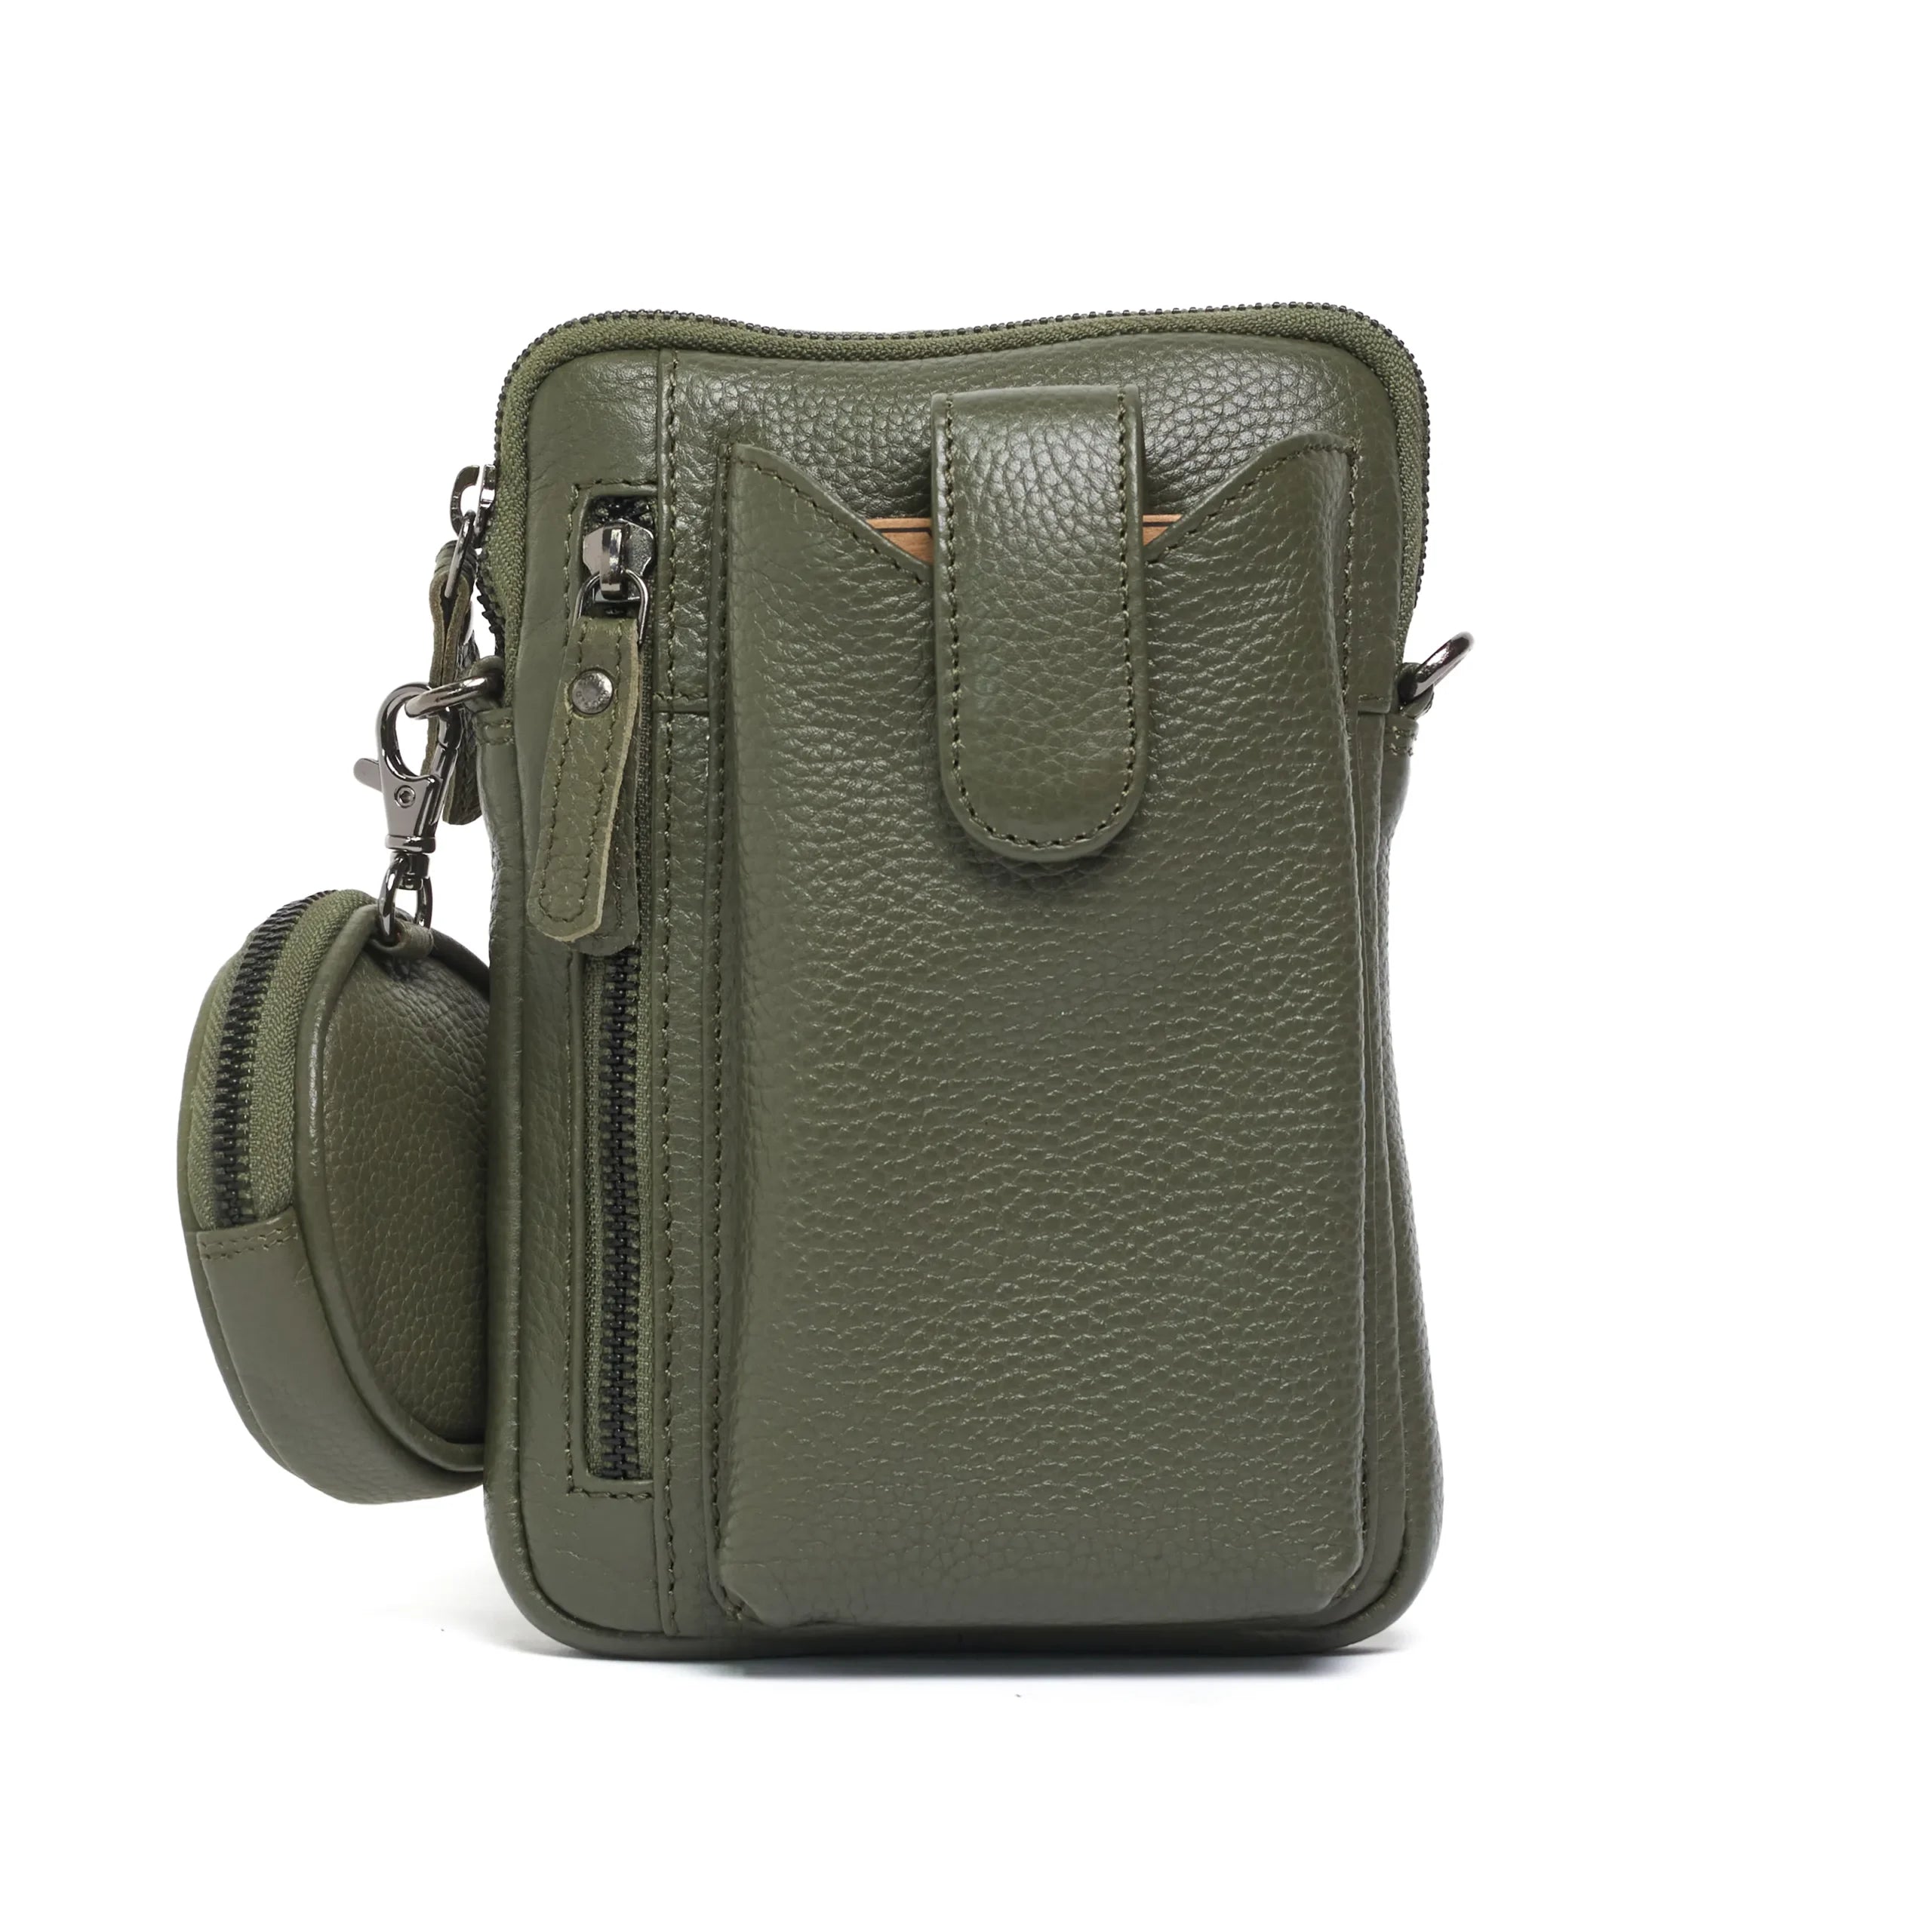 Oran - RH-4915 Sandy Phone bag with removable coin case - Green